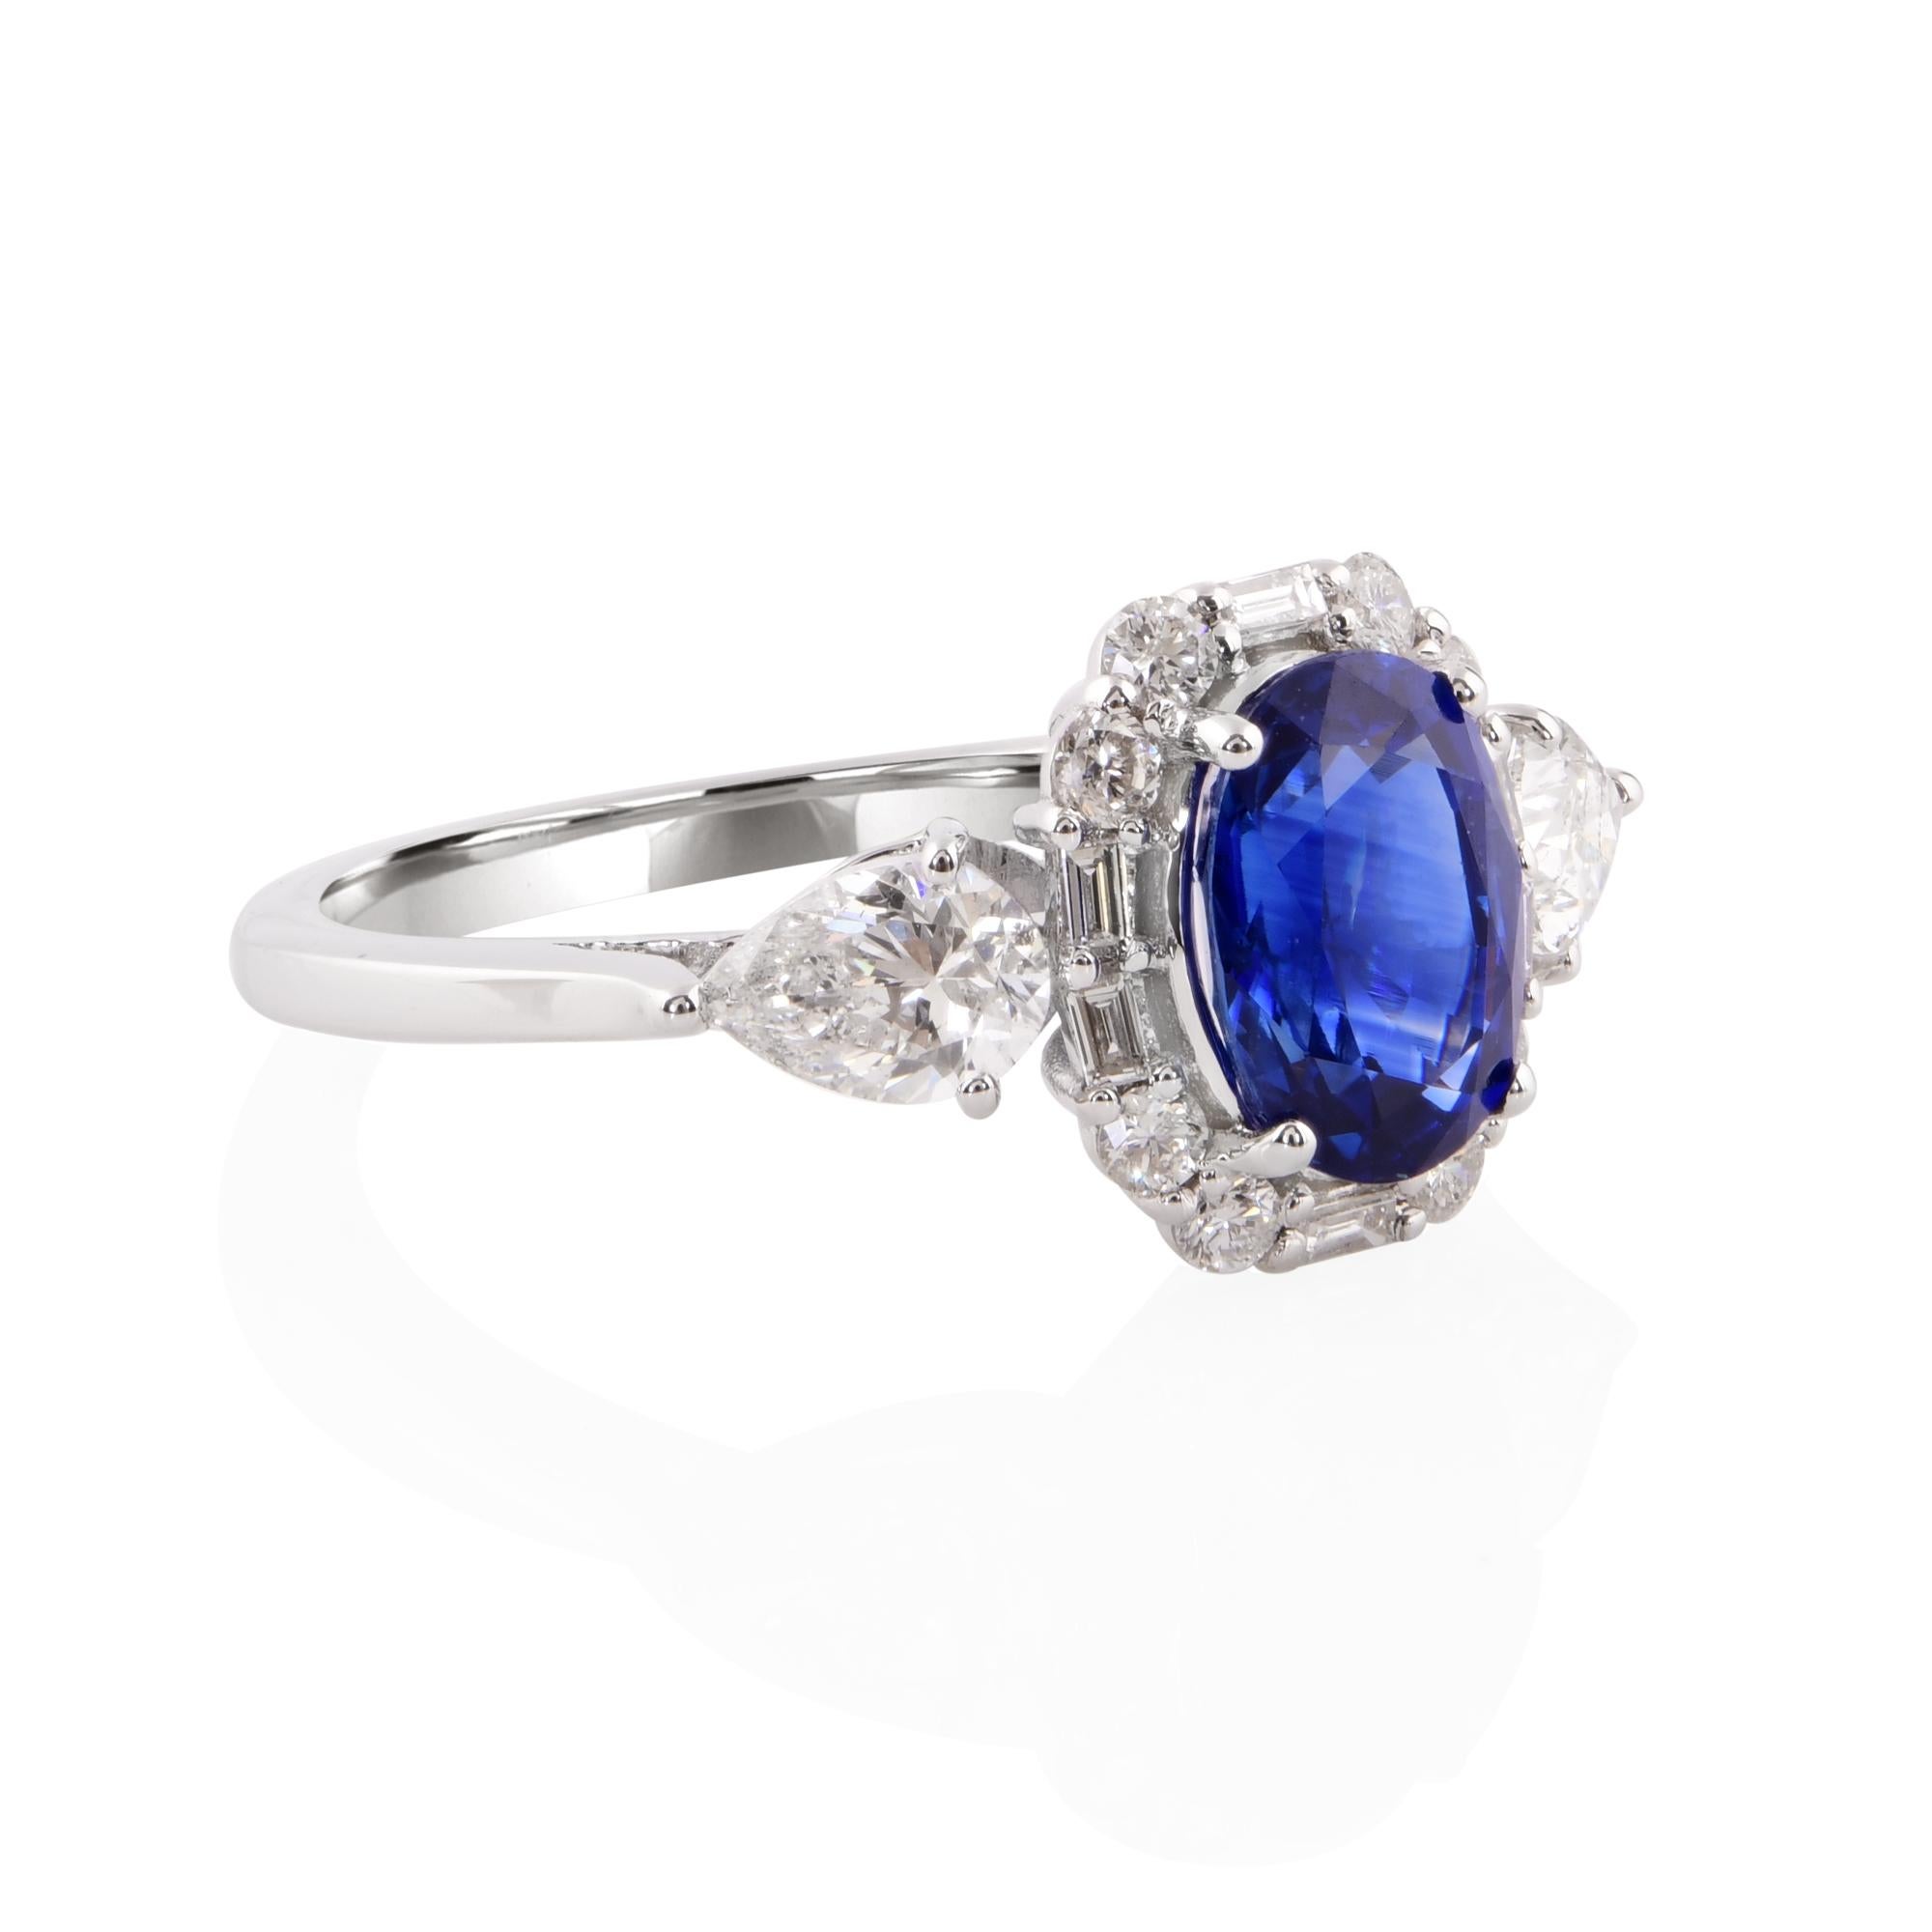 Crafted with precision and attention to detail, this cocktail ring boasts a design that is both elegant and eye-catching. The luminous 18 karat white gold setting provides a radiant backdrop for the gemstones, enhancing their natural beauty and